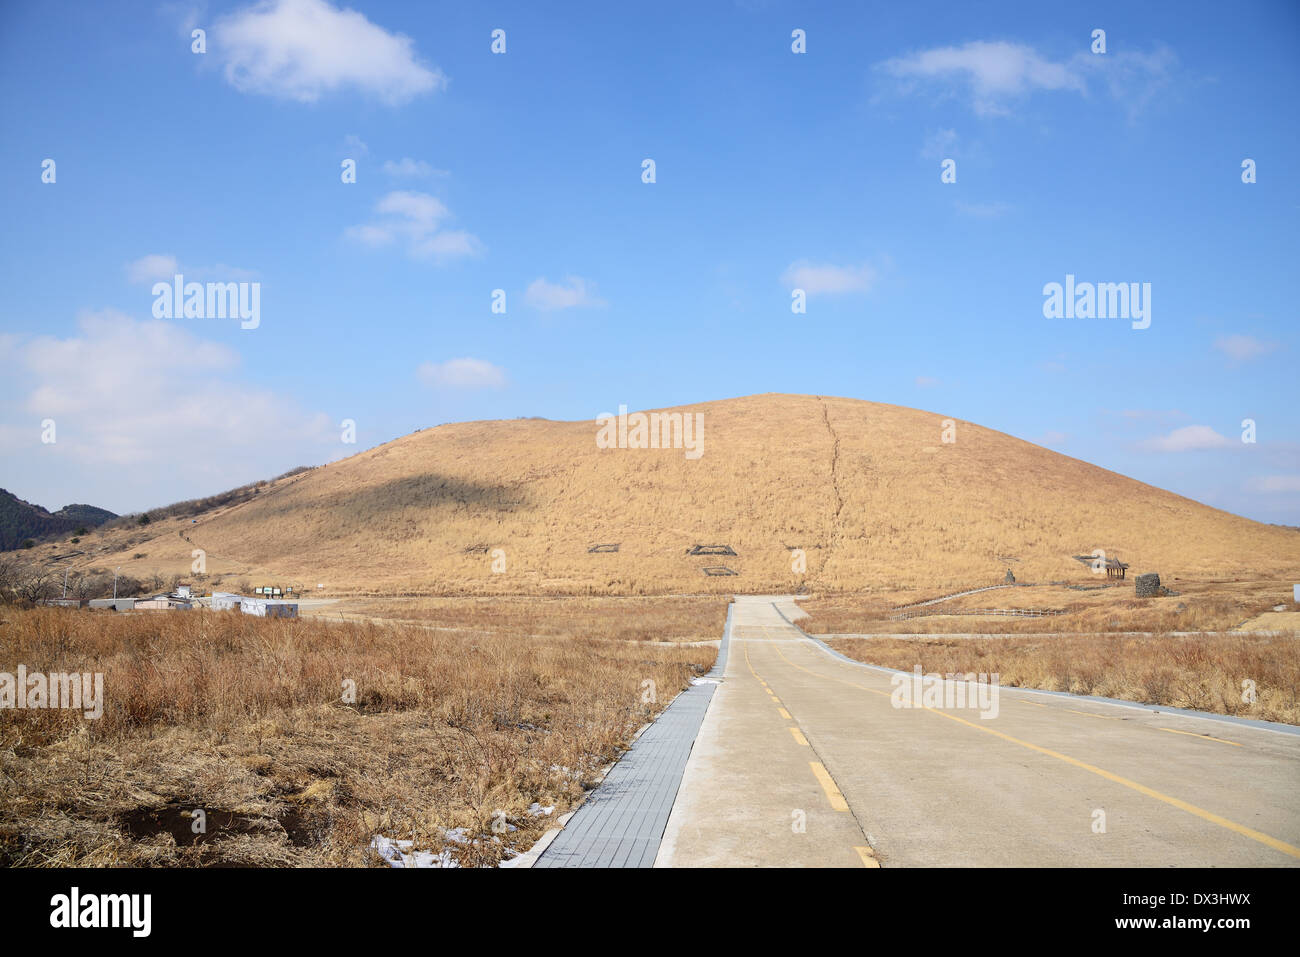 View of SaeByeol Volcanic Cone in Jeju Island Stock Photo